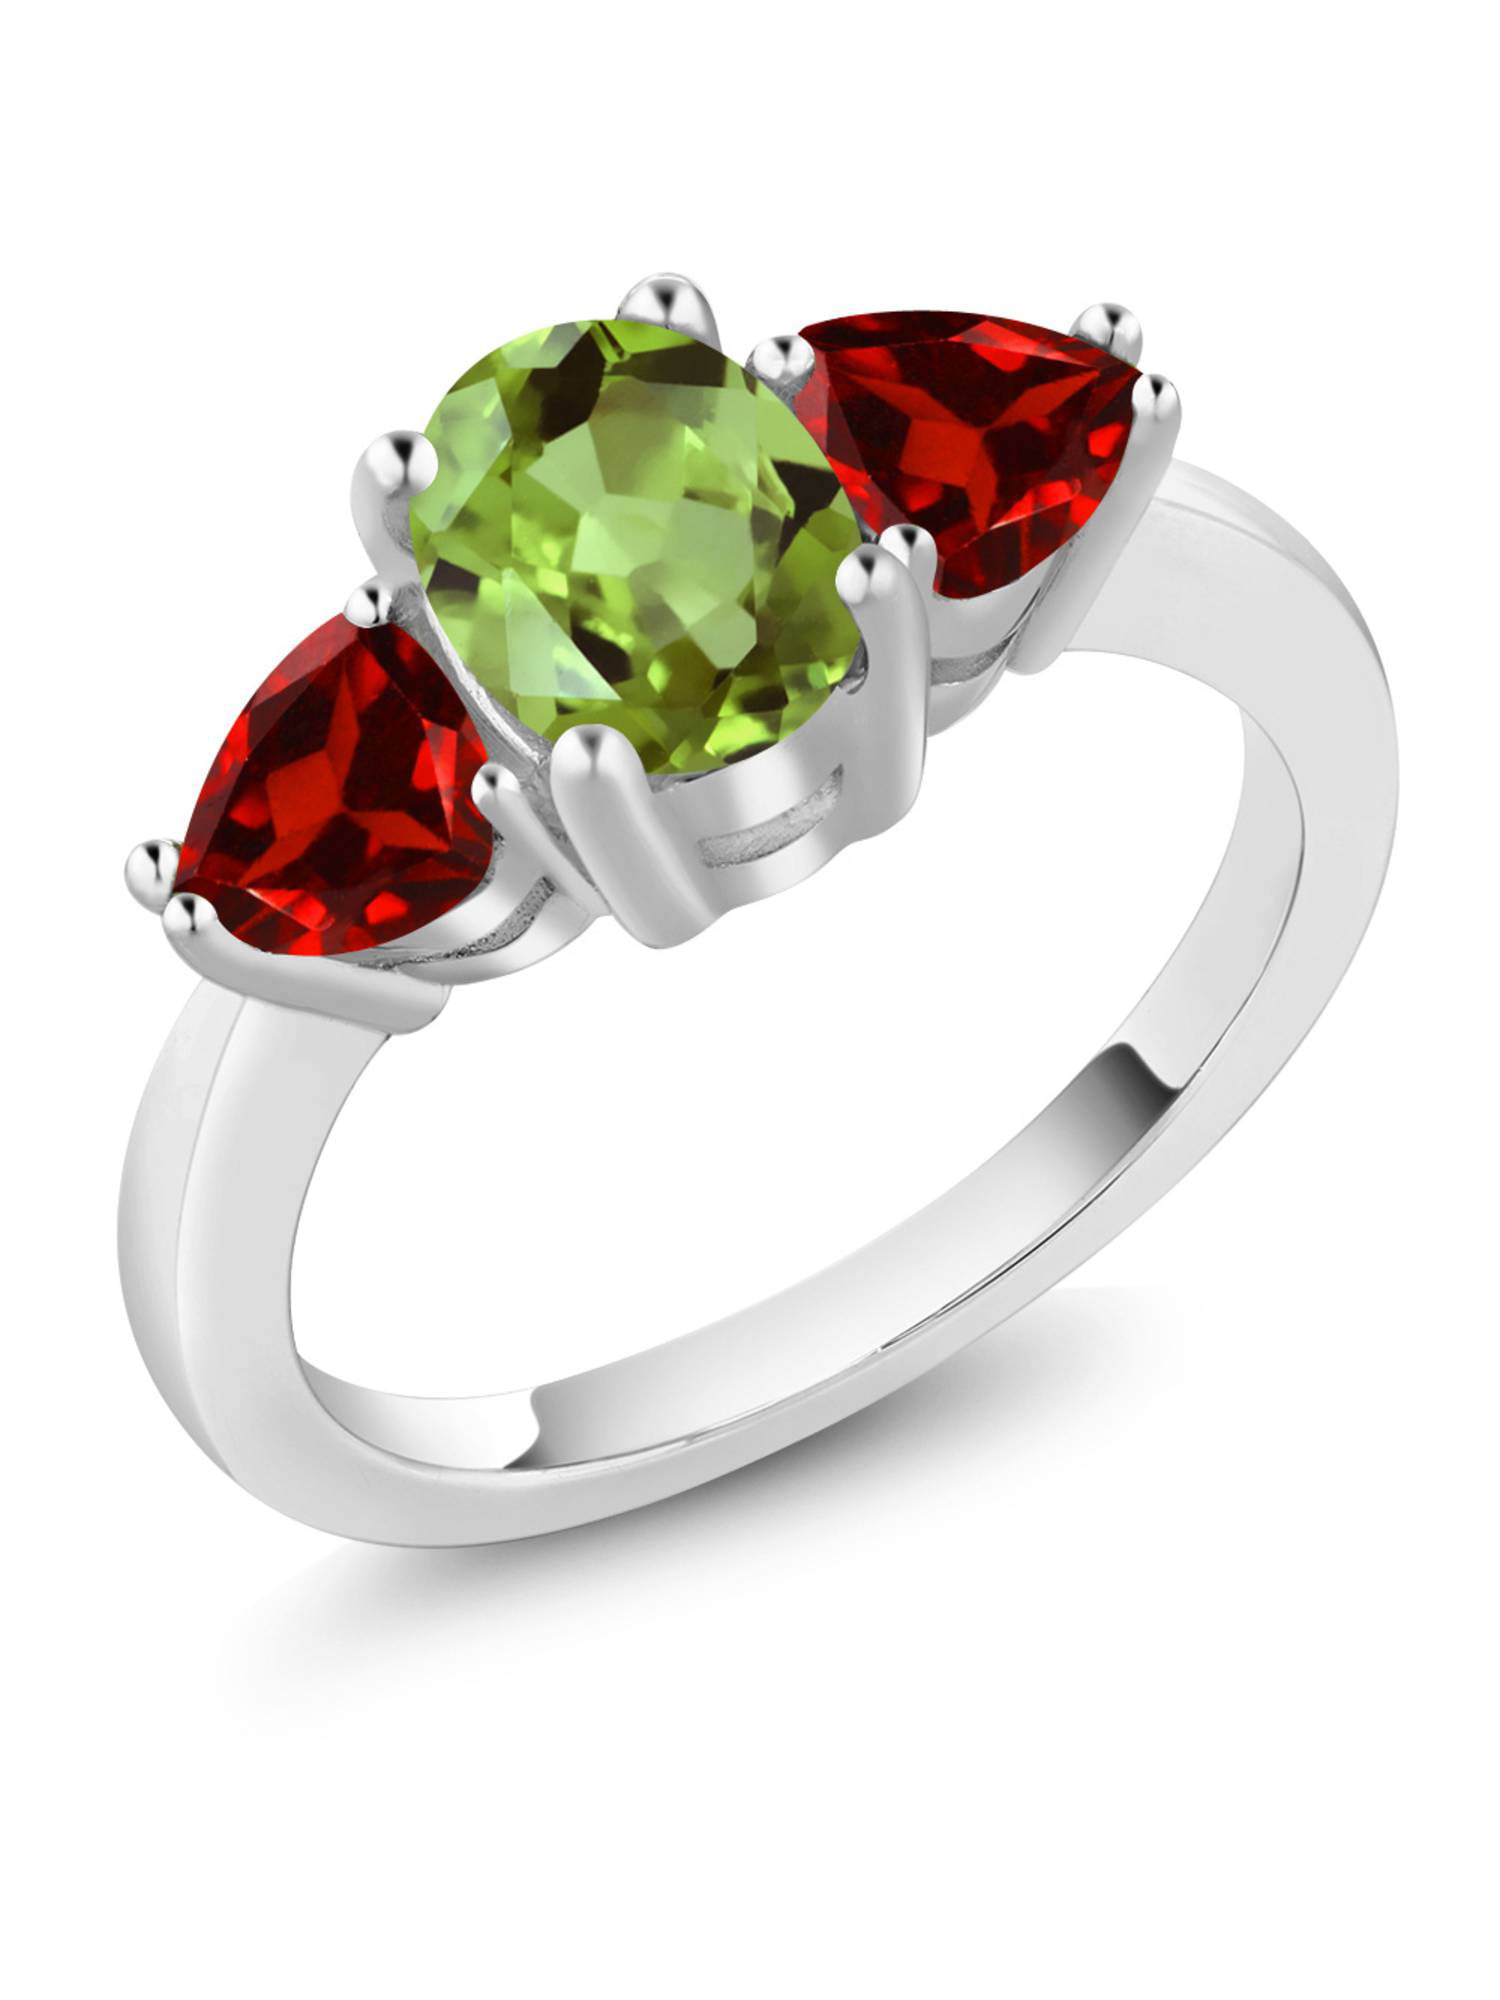 Gem Stone King 925 Sterling Silver Green Peridot and Red Garnet 3-Stone  Ring for Women (2.41 Cttw, Gemstone Birthstone, Available In Size 5, 6, 7,  8,